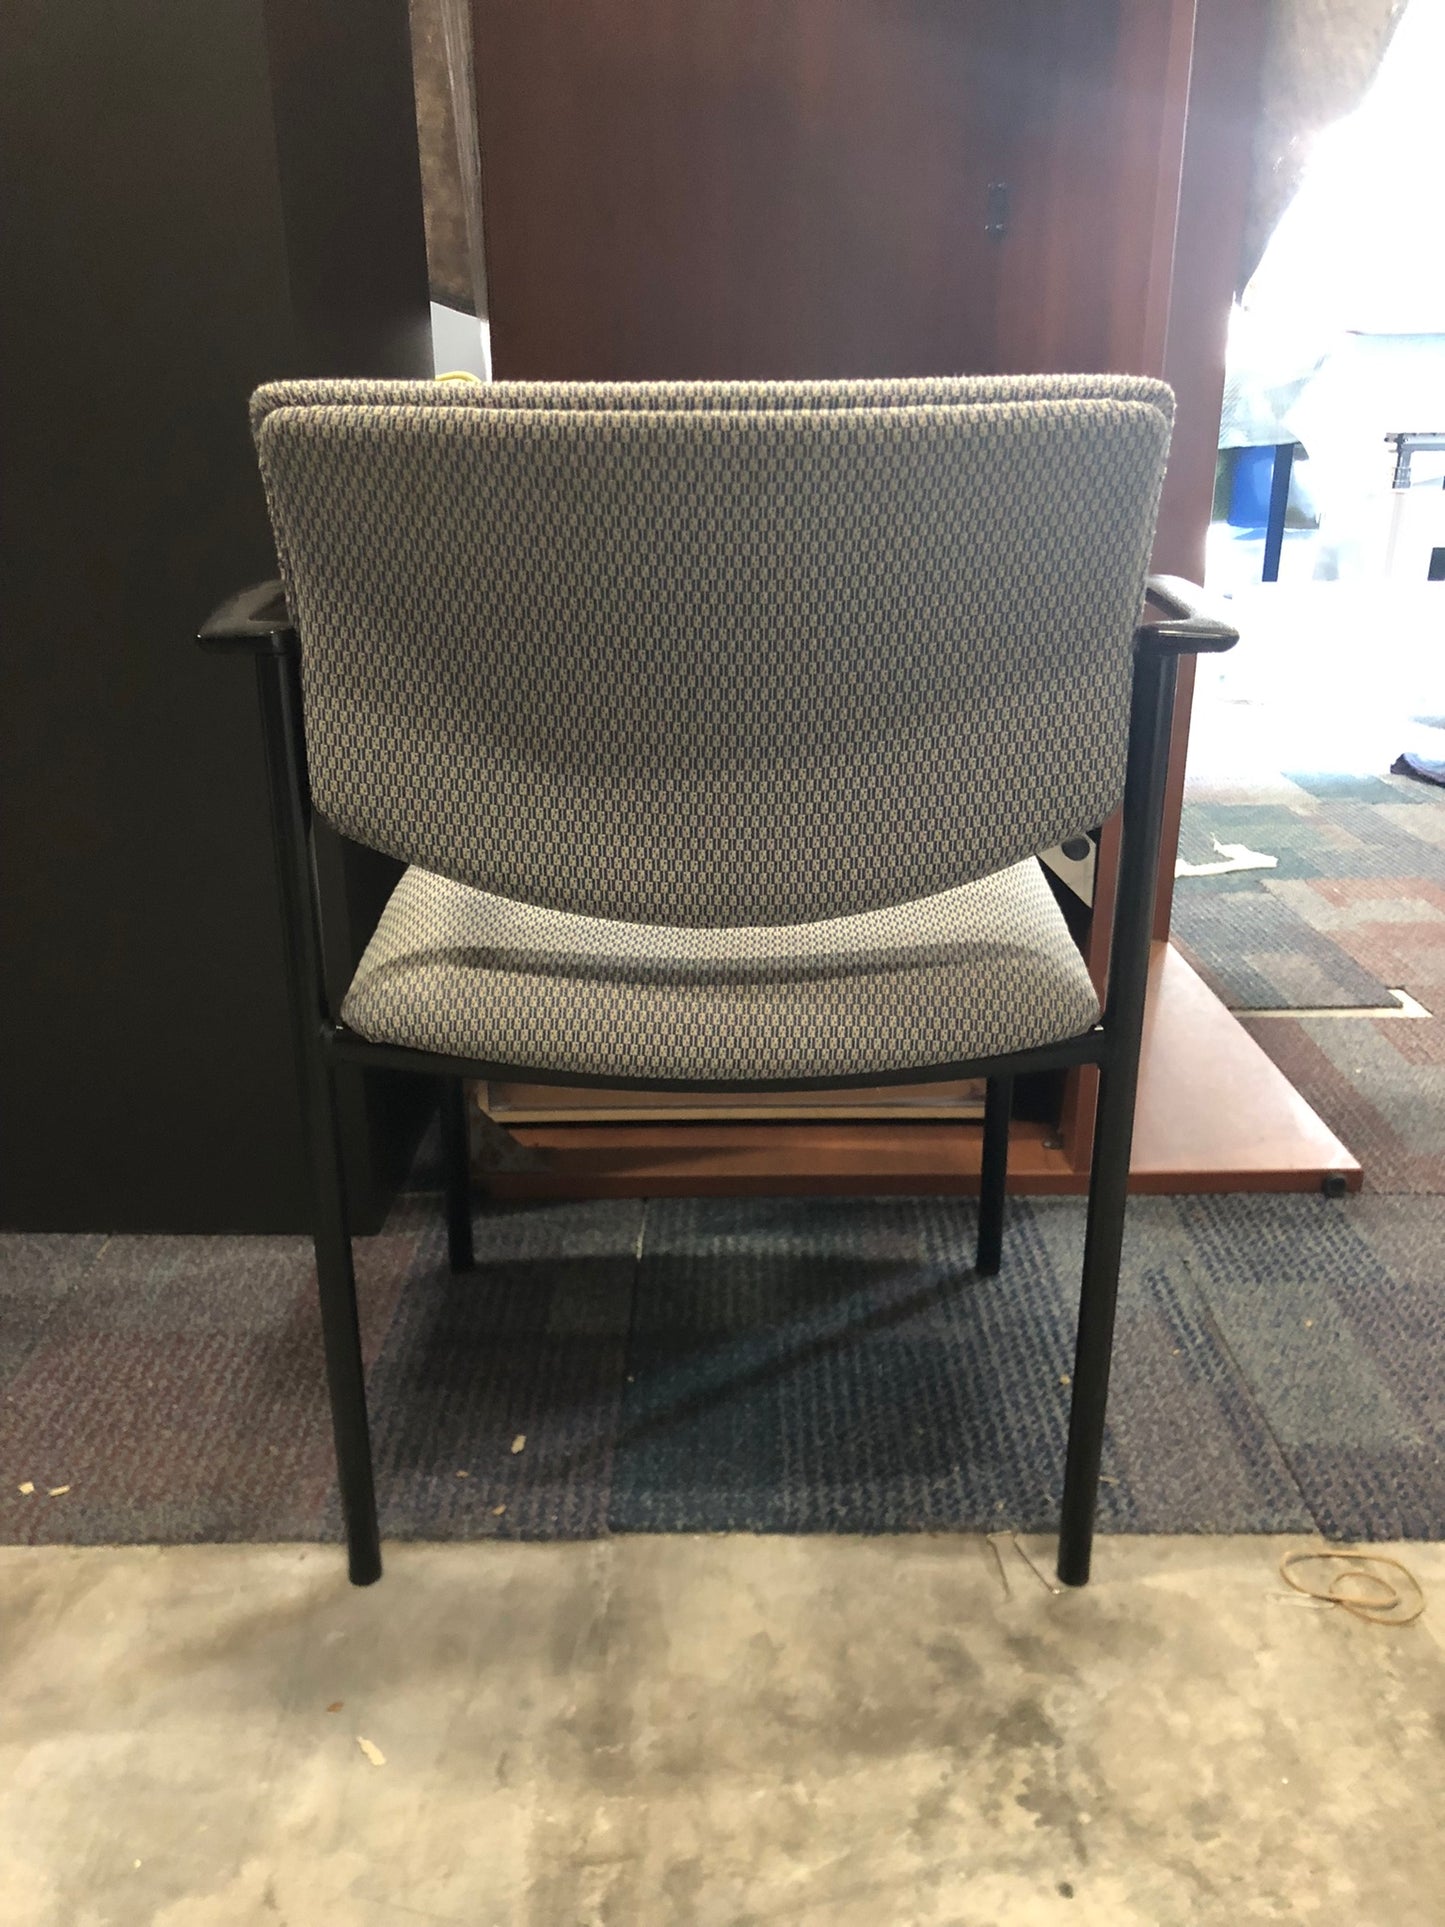 STEELCASE PLAYER STACK CHAIR